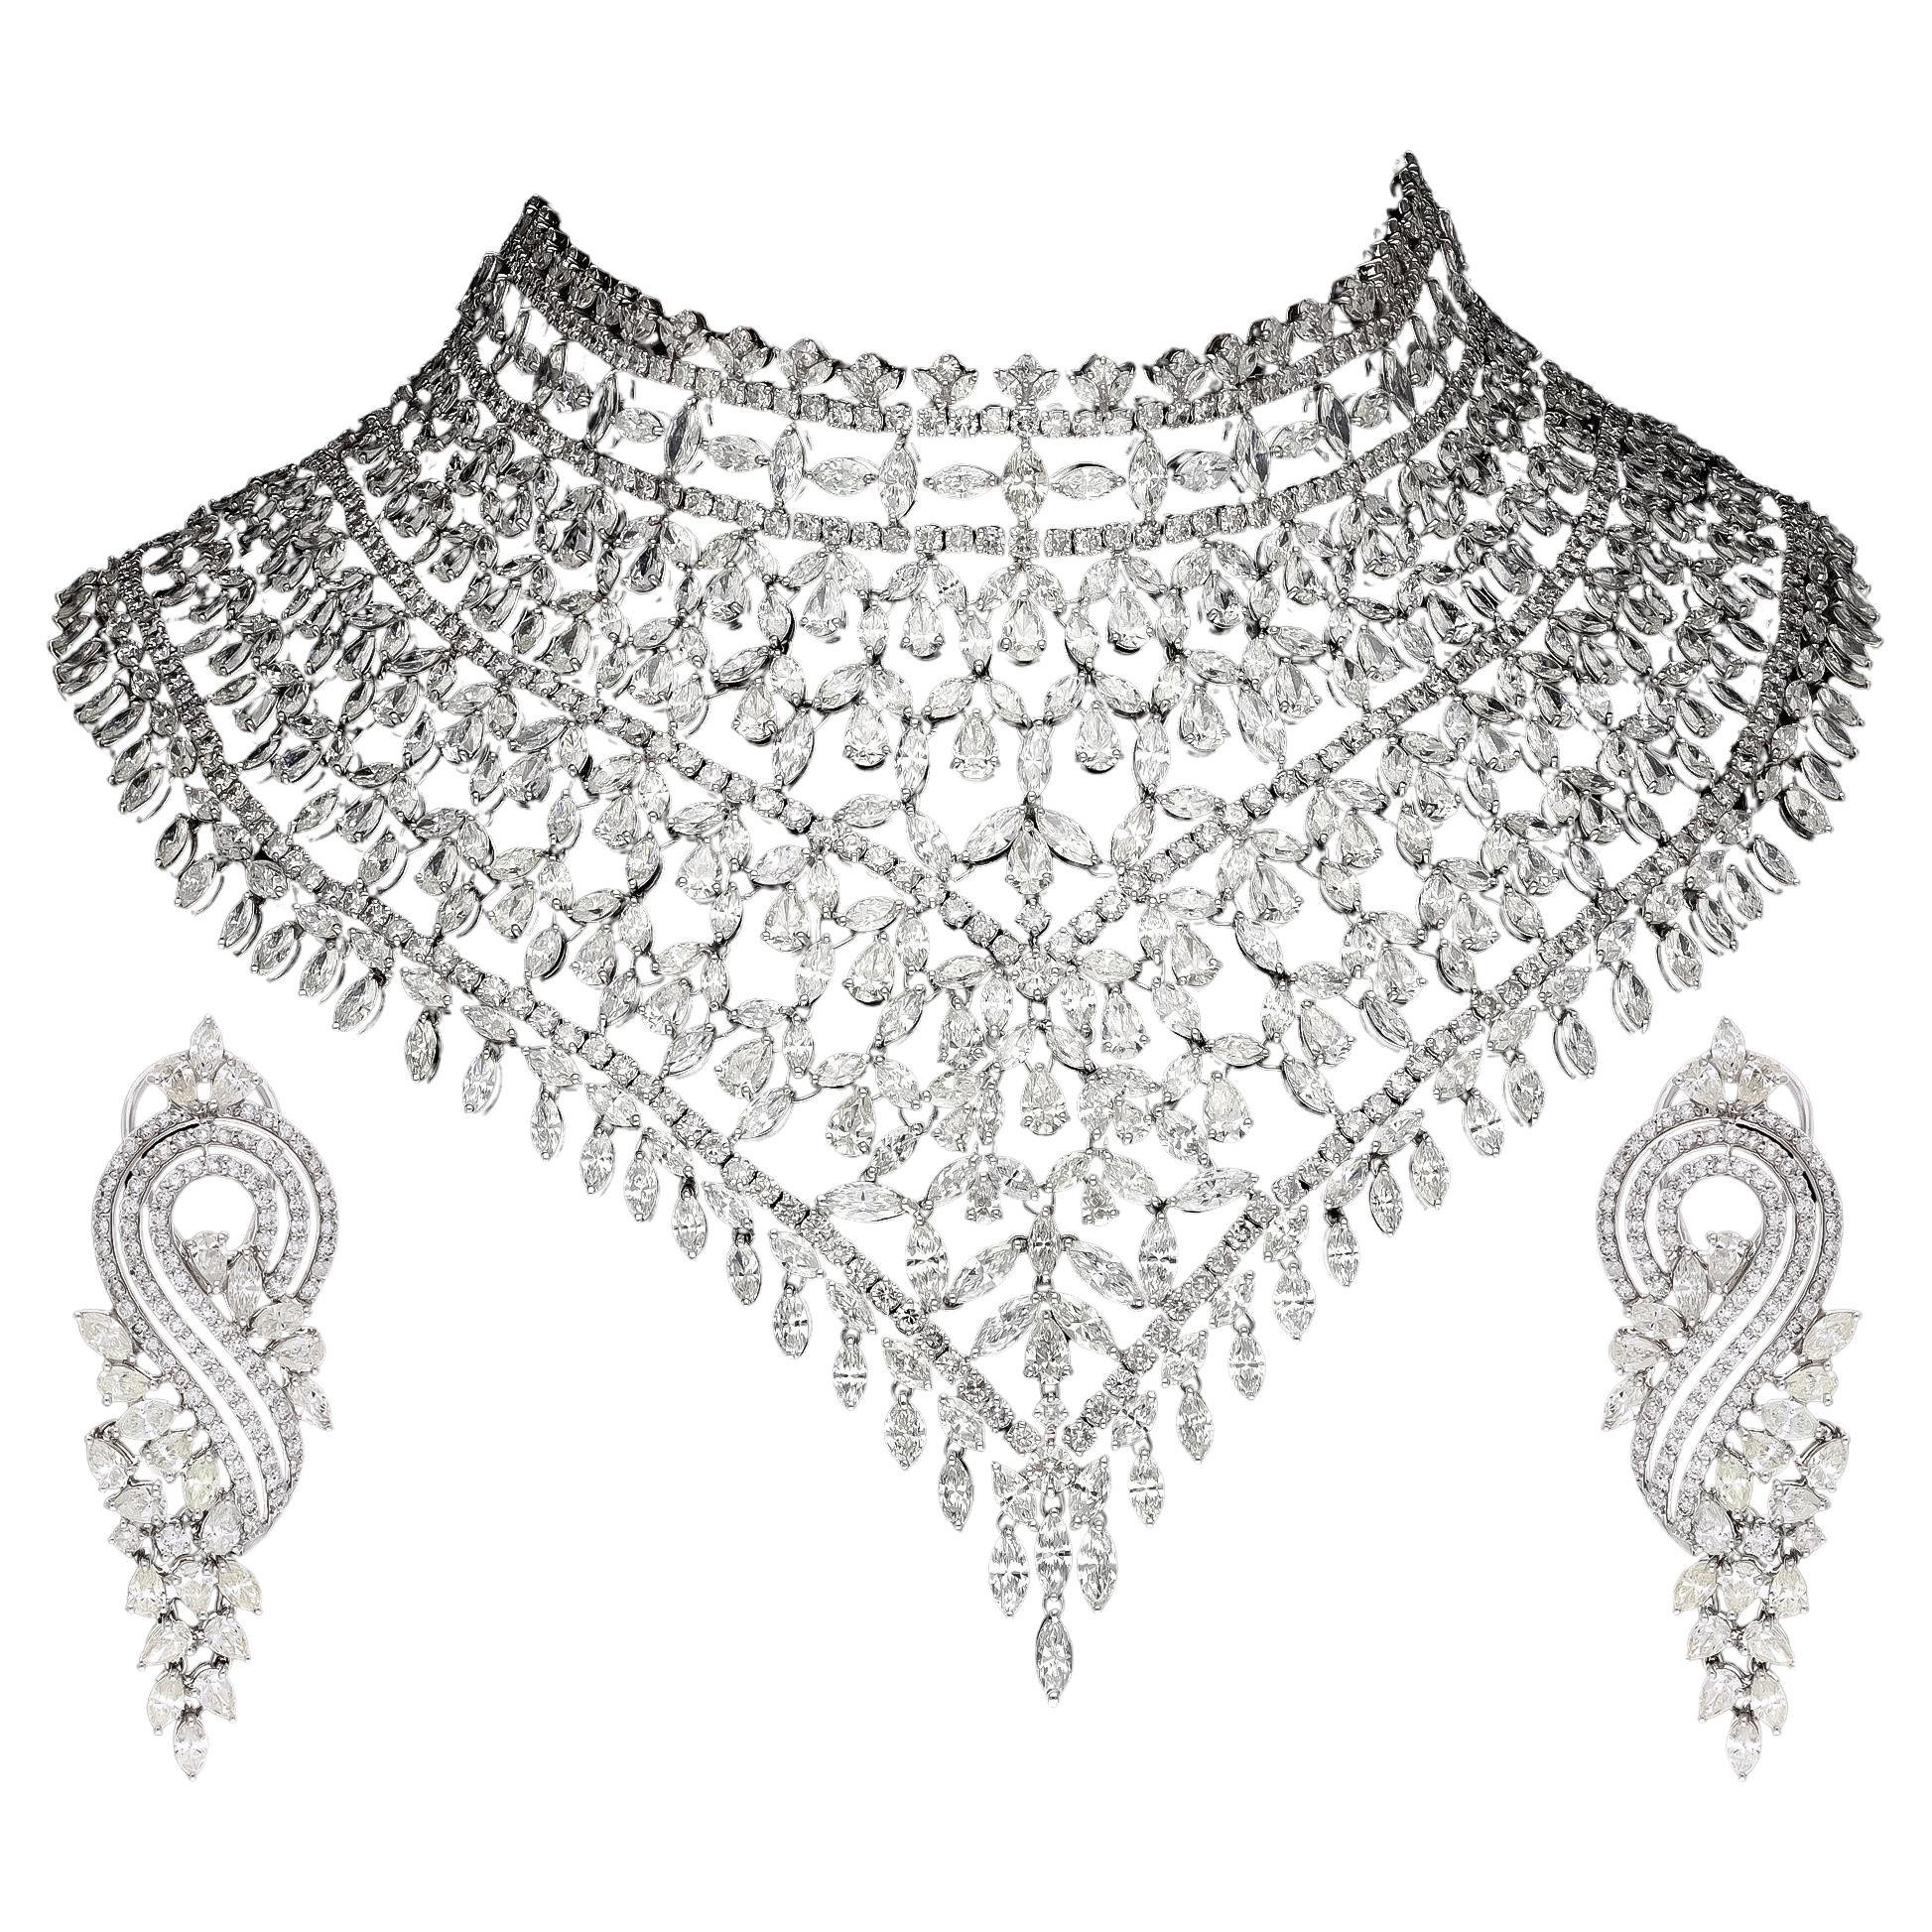 Natural Huge diamond necklace with 135.87 cts diamond and 18k gold